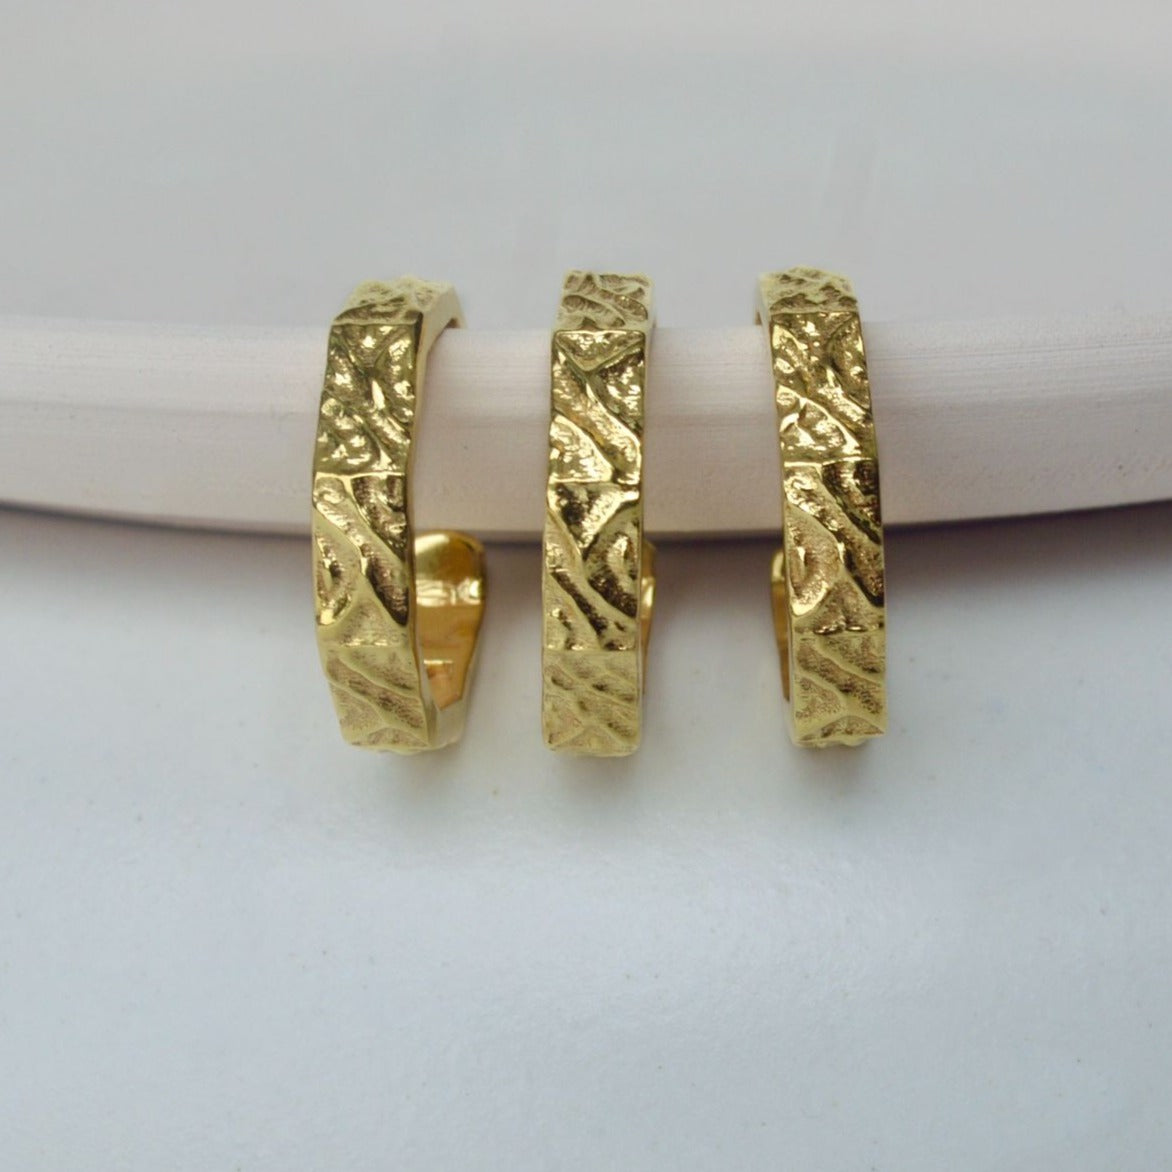 Ring Designs in Gold for Women